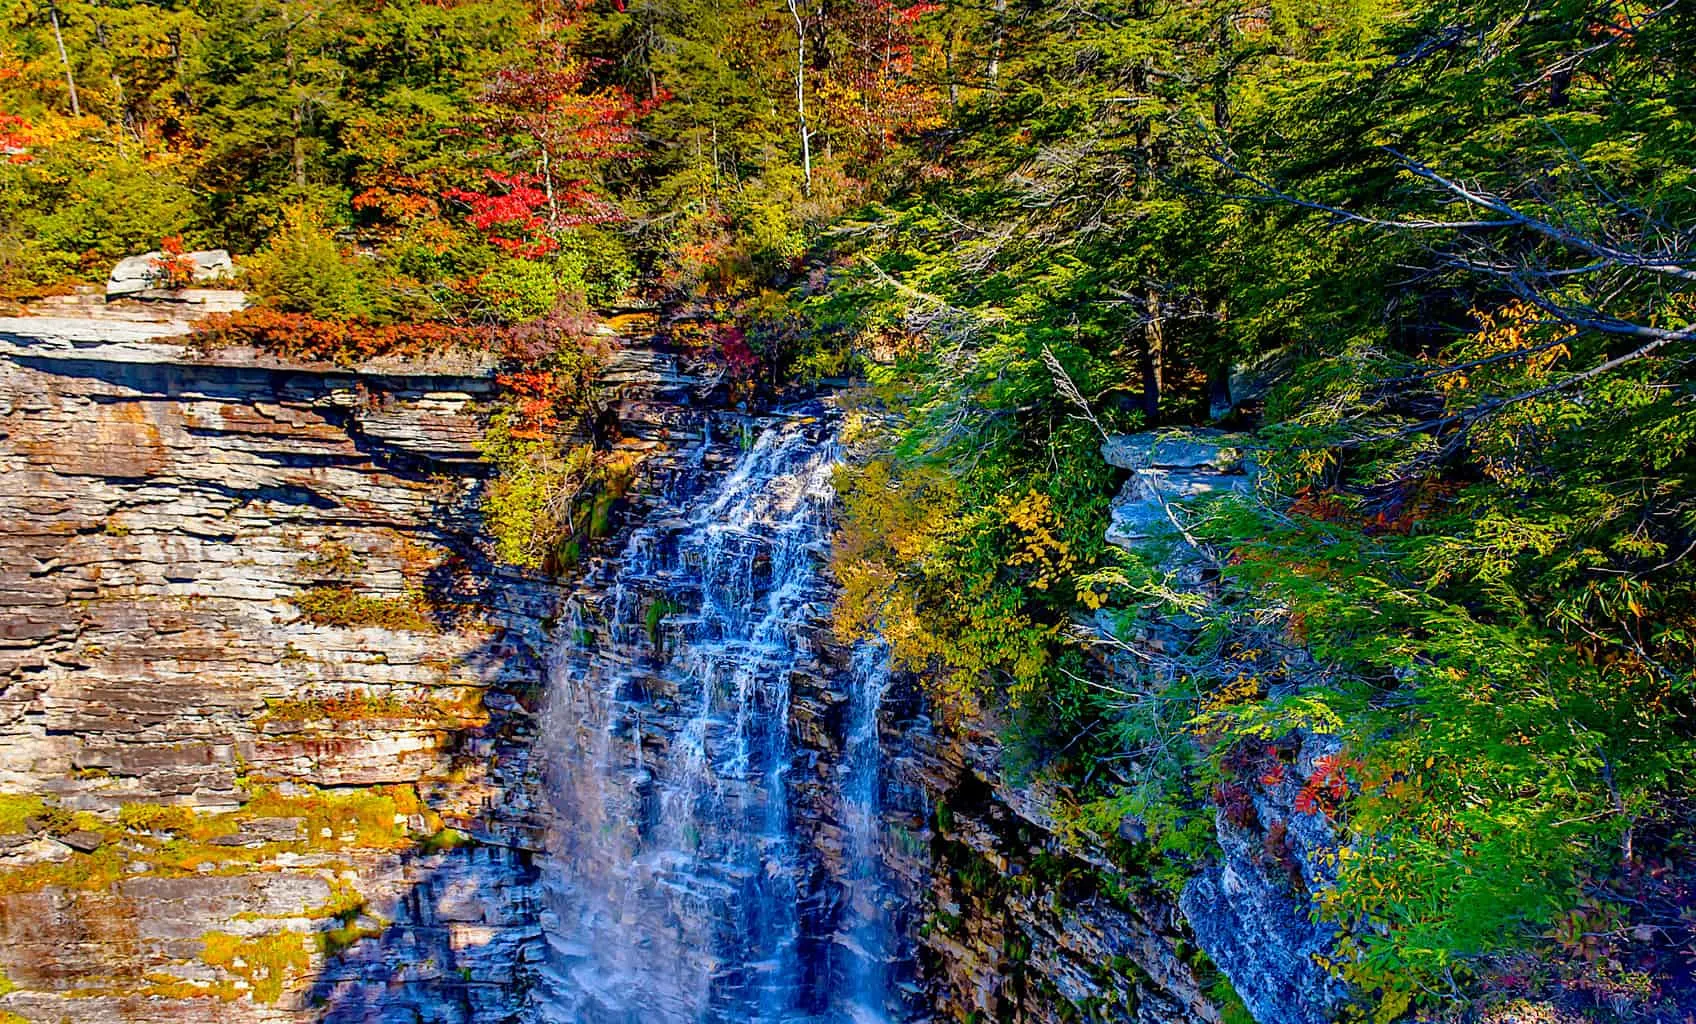 A view of Verkeerderkill Falls in the fall. Image sourced from Jim Hall on Flickr.com. 